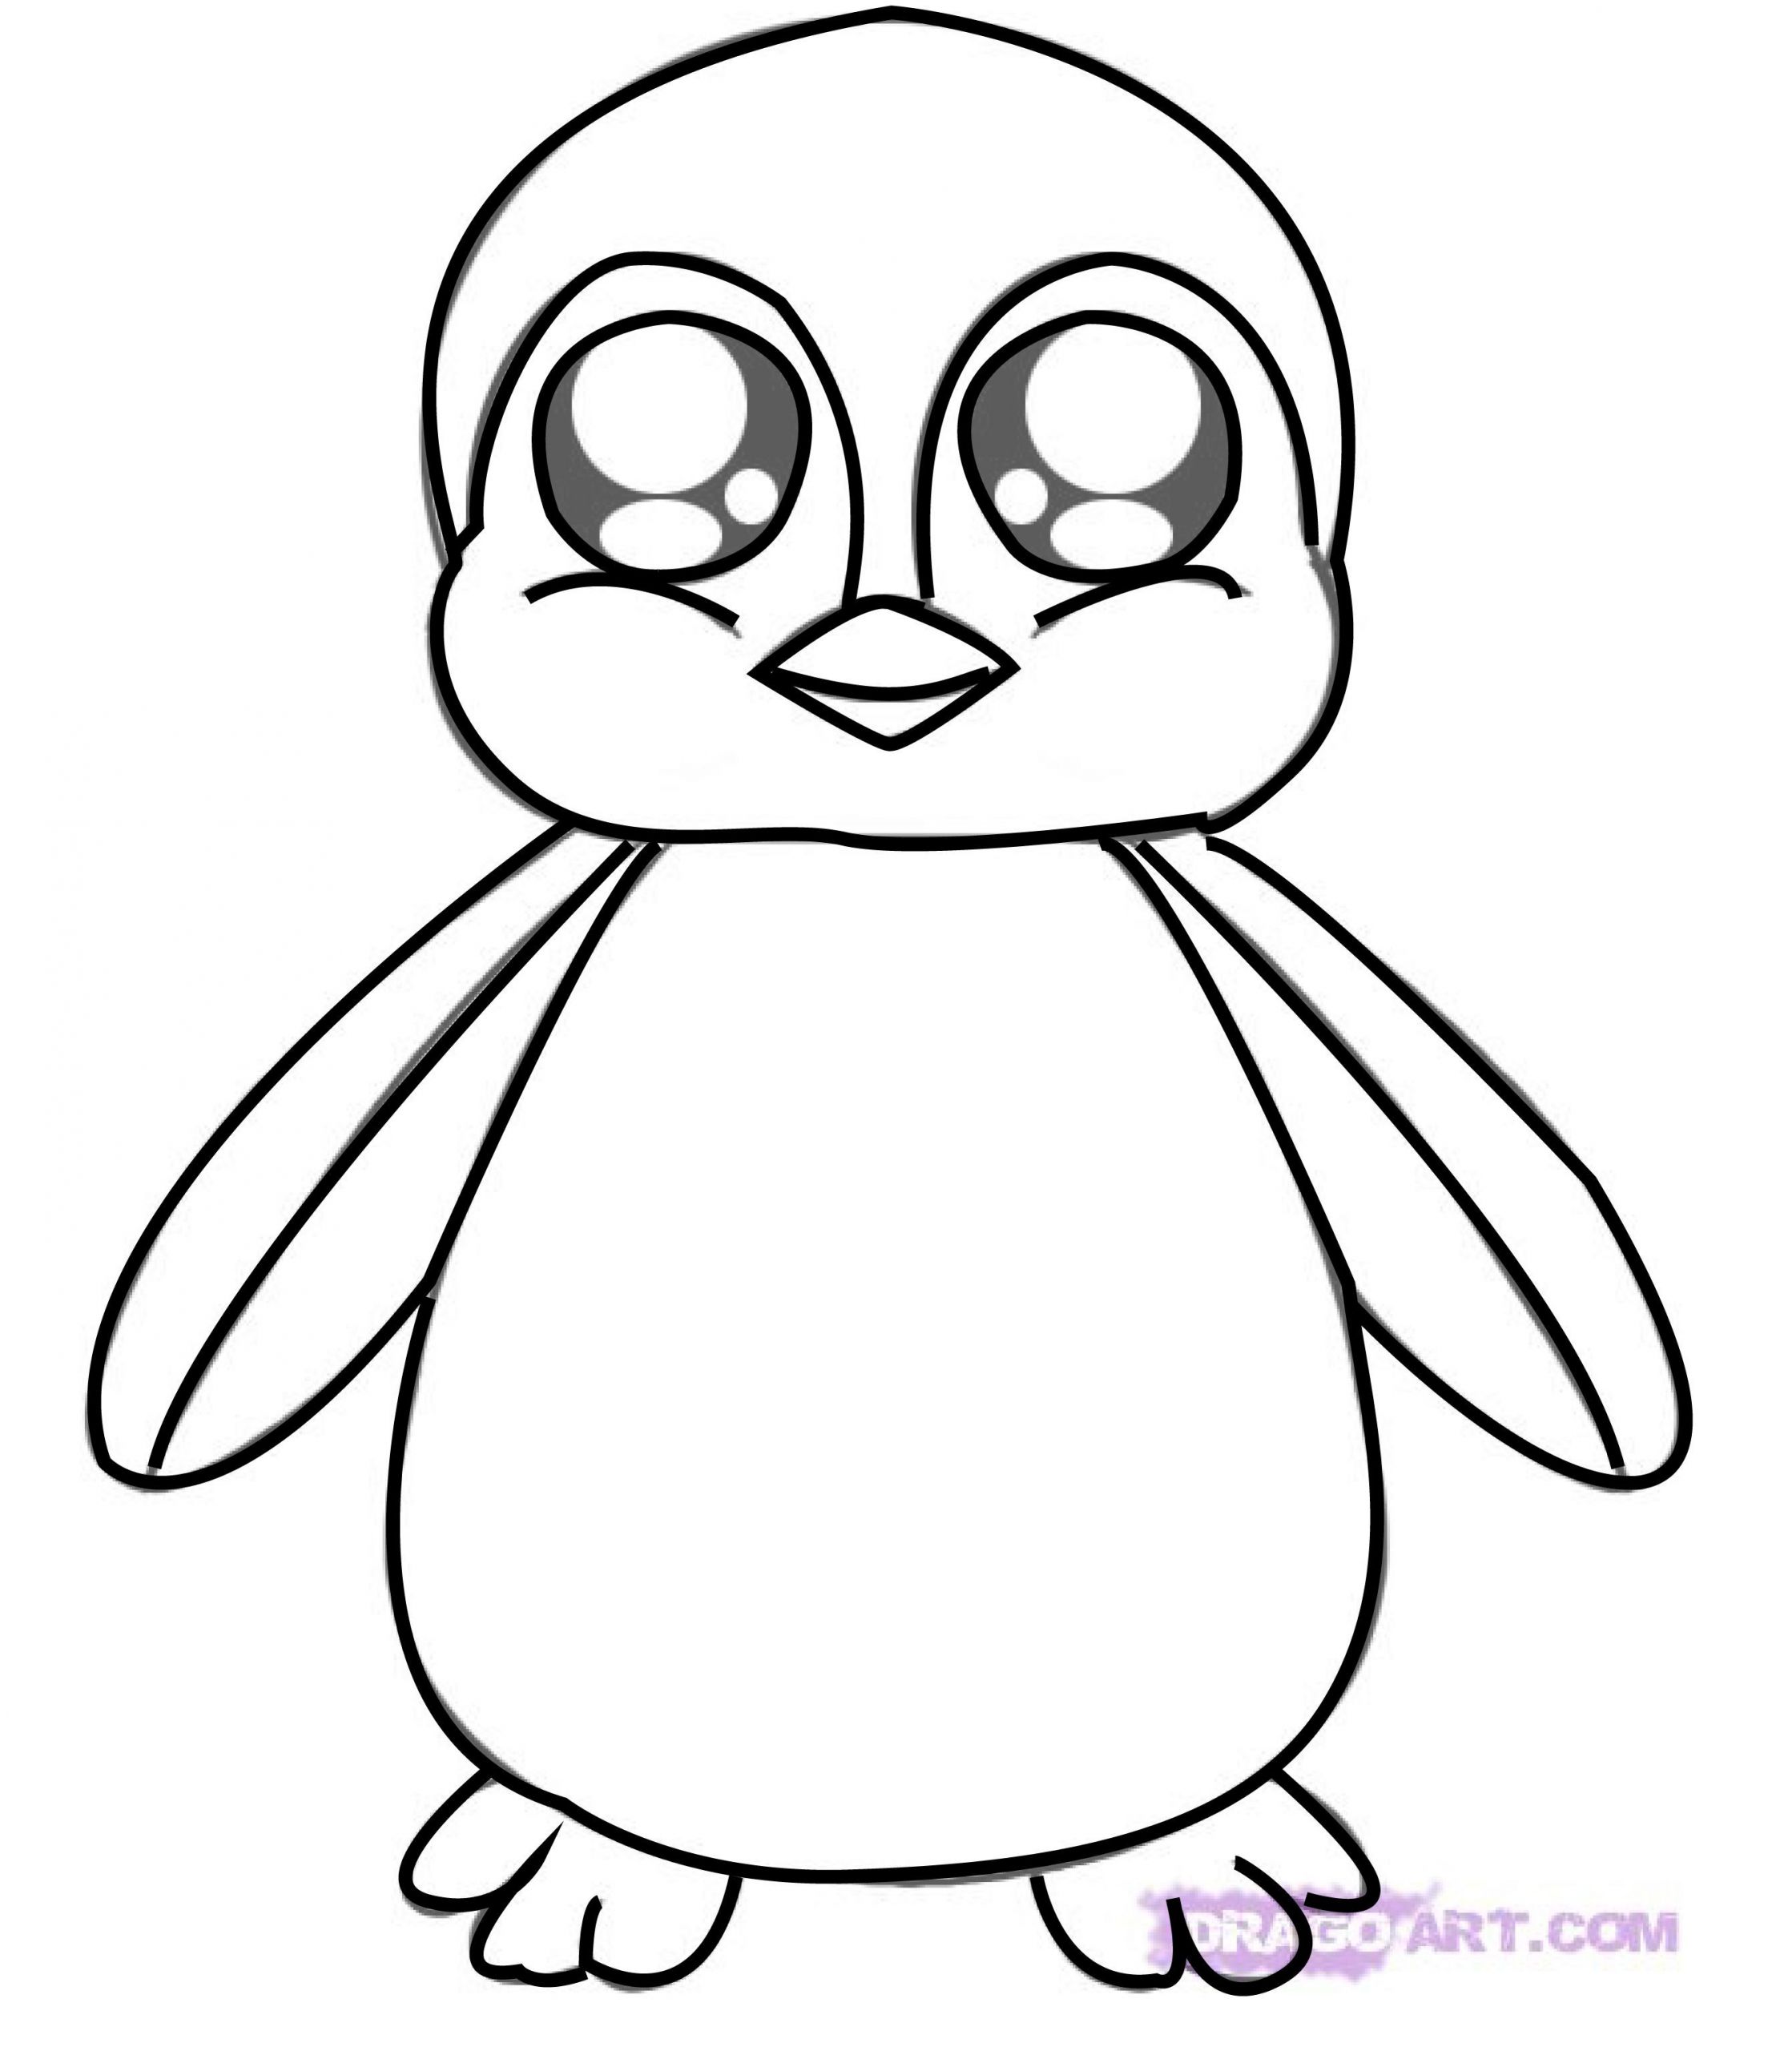 Baby Penguin Coloring Page
 Best Free Printable Club Penguin Coloring Pages